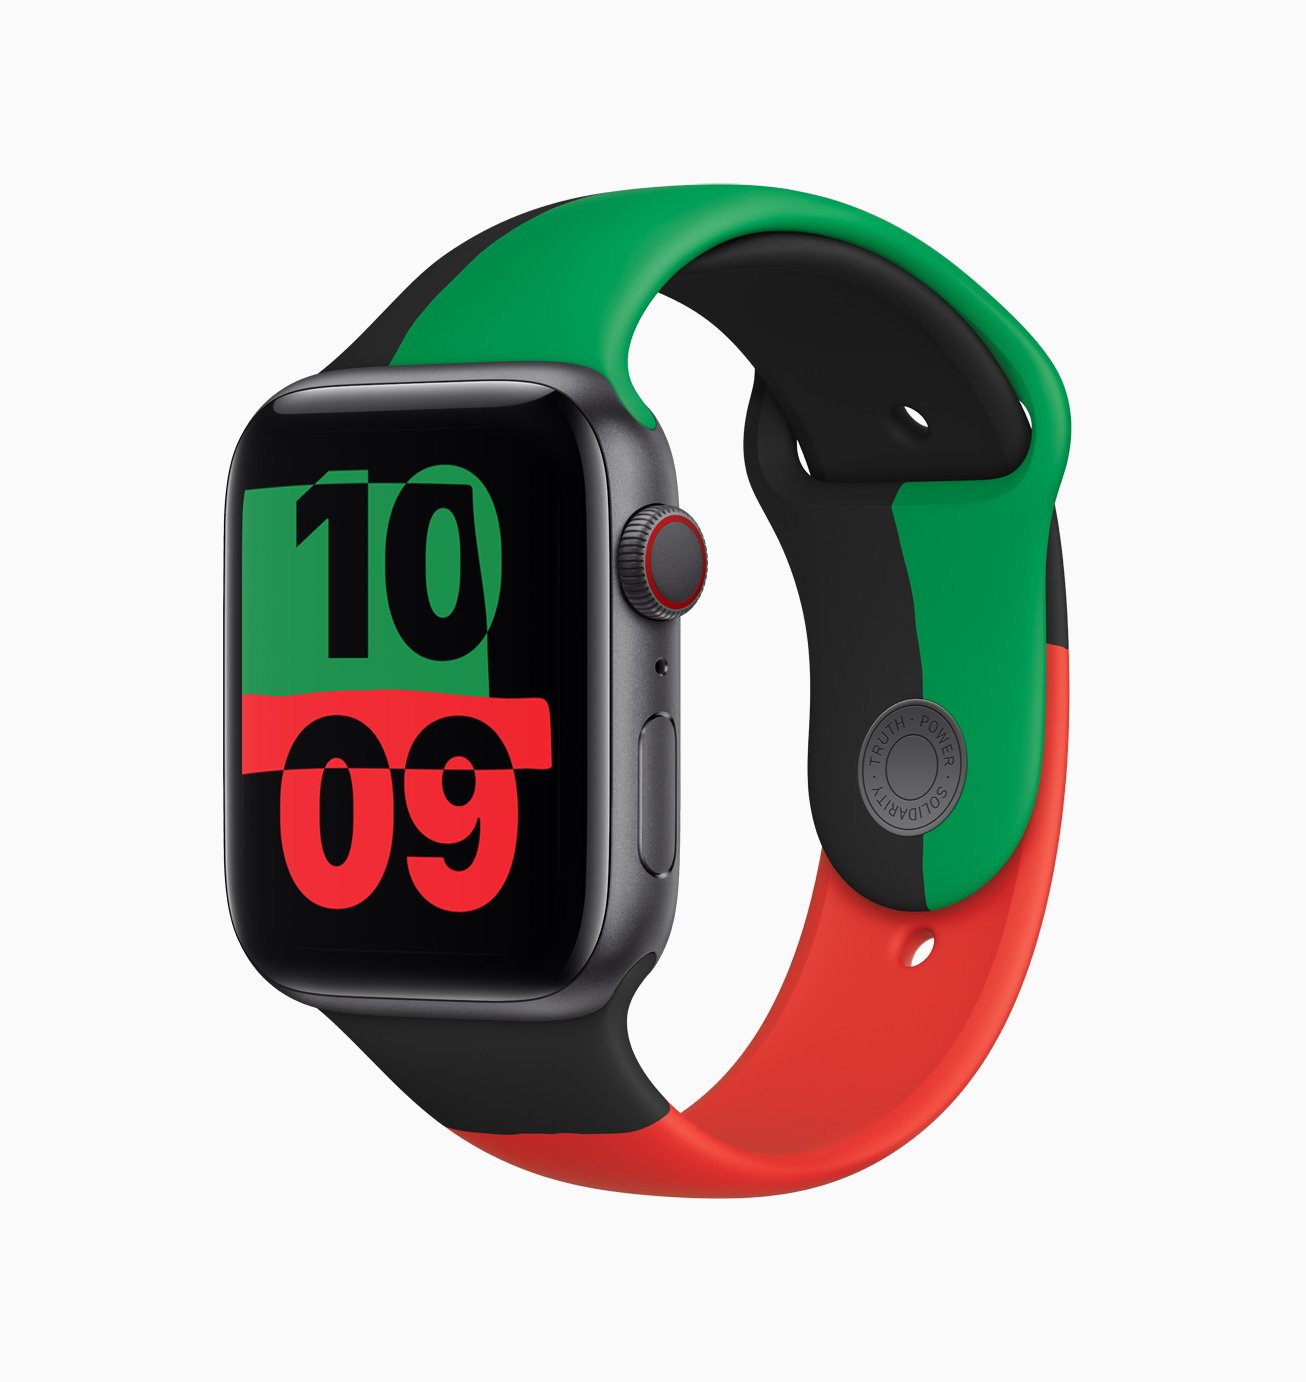 Apple has launched the Black Unity Collection for Black History Month. The collection is made up of three parts: a limited edition Apple Watch Series 6, the Black Unity Sport Band, and a Unity watch face. Photo: Apple